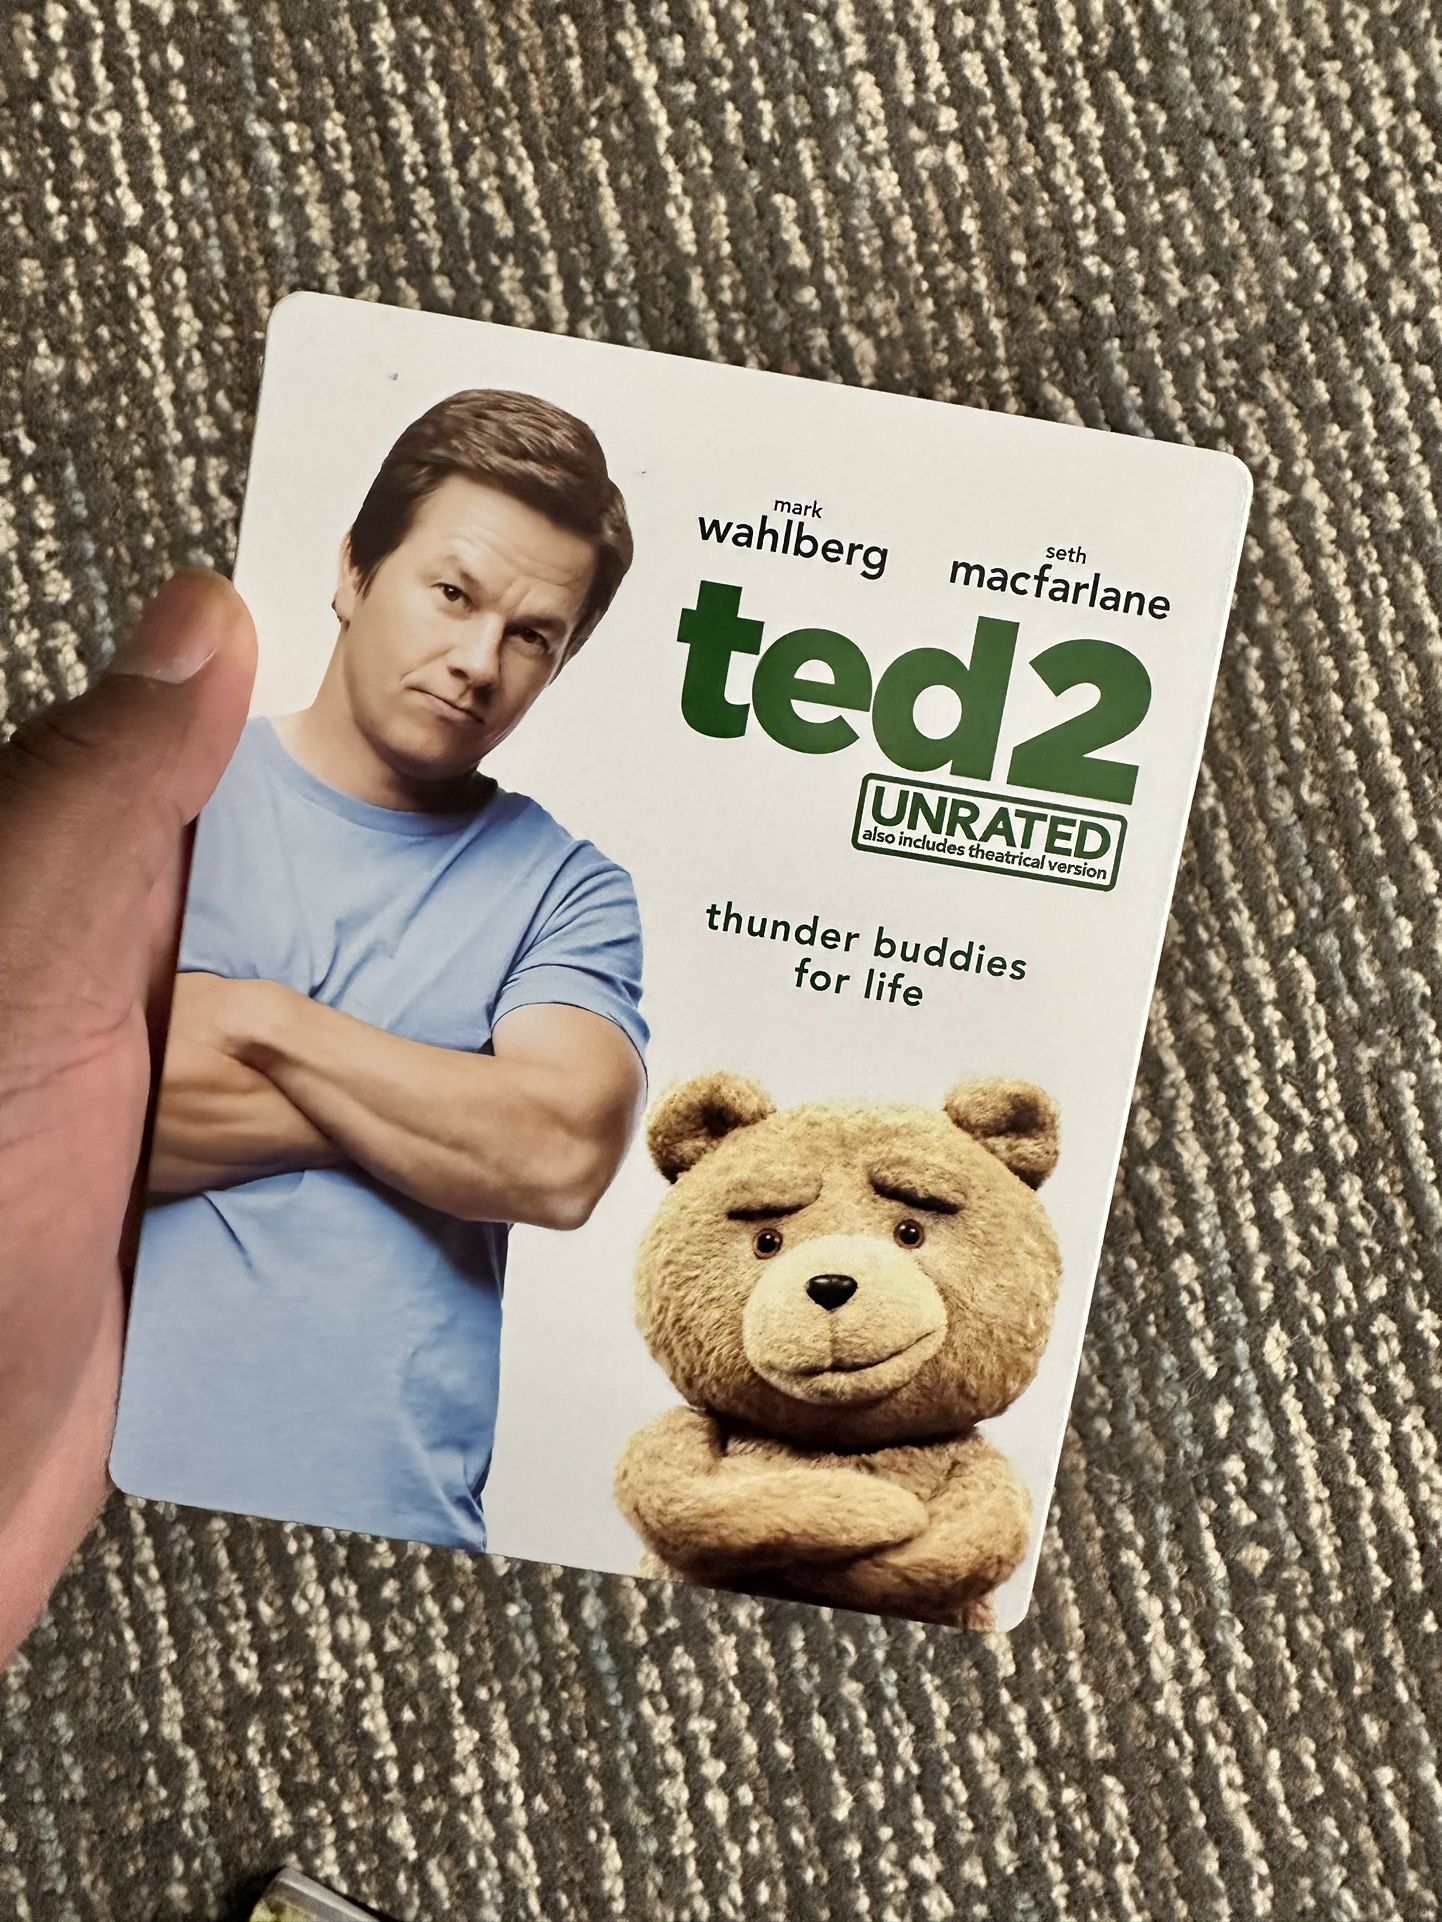 Ted 2 Unrated (Steelbook) Blu-ray 